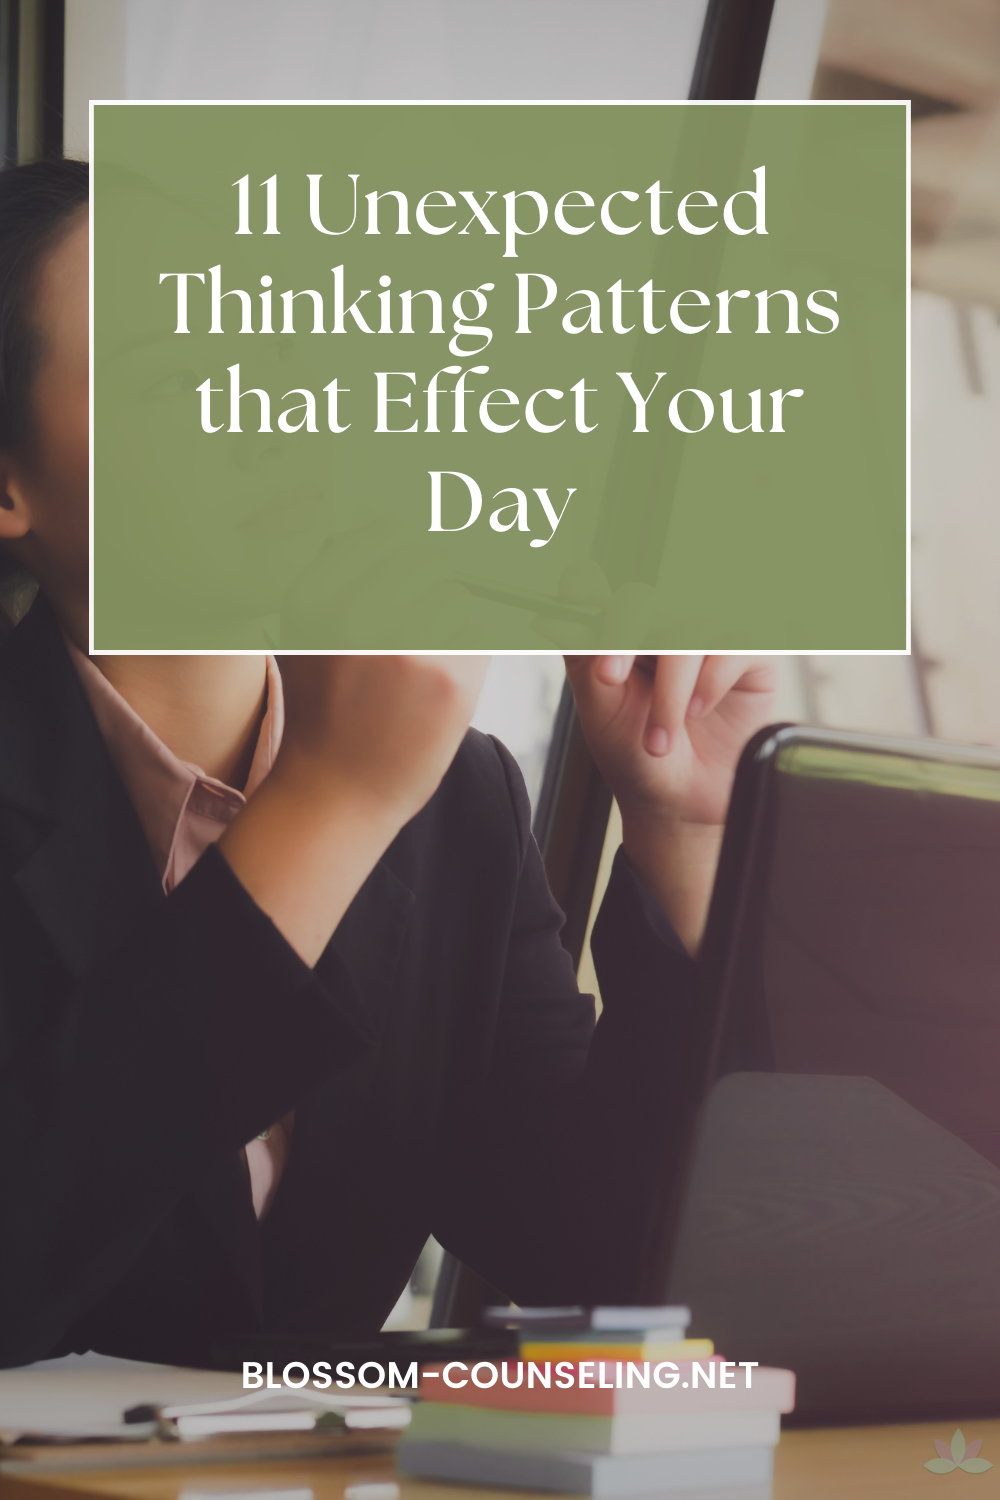 11 Unexpected Thinking Patterns that Effect Your Day